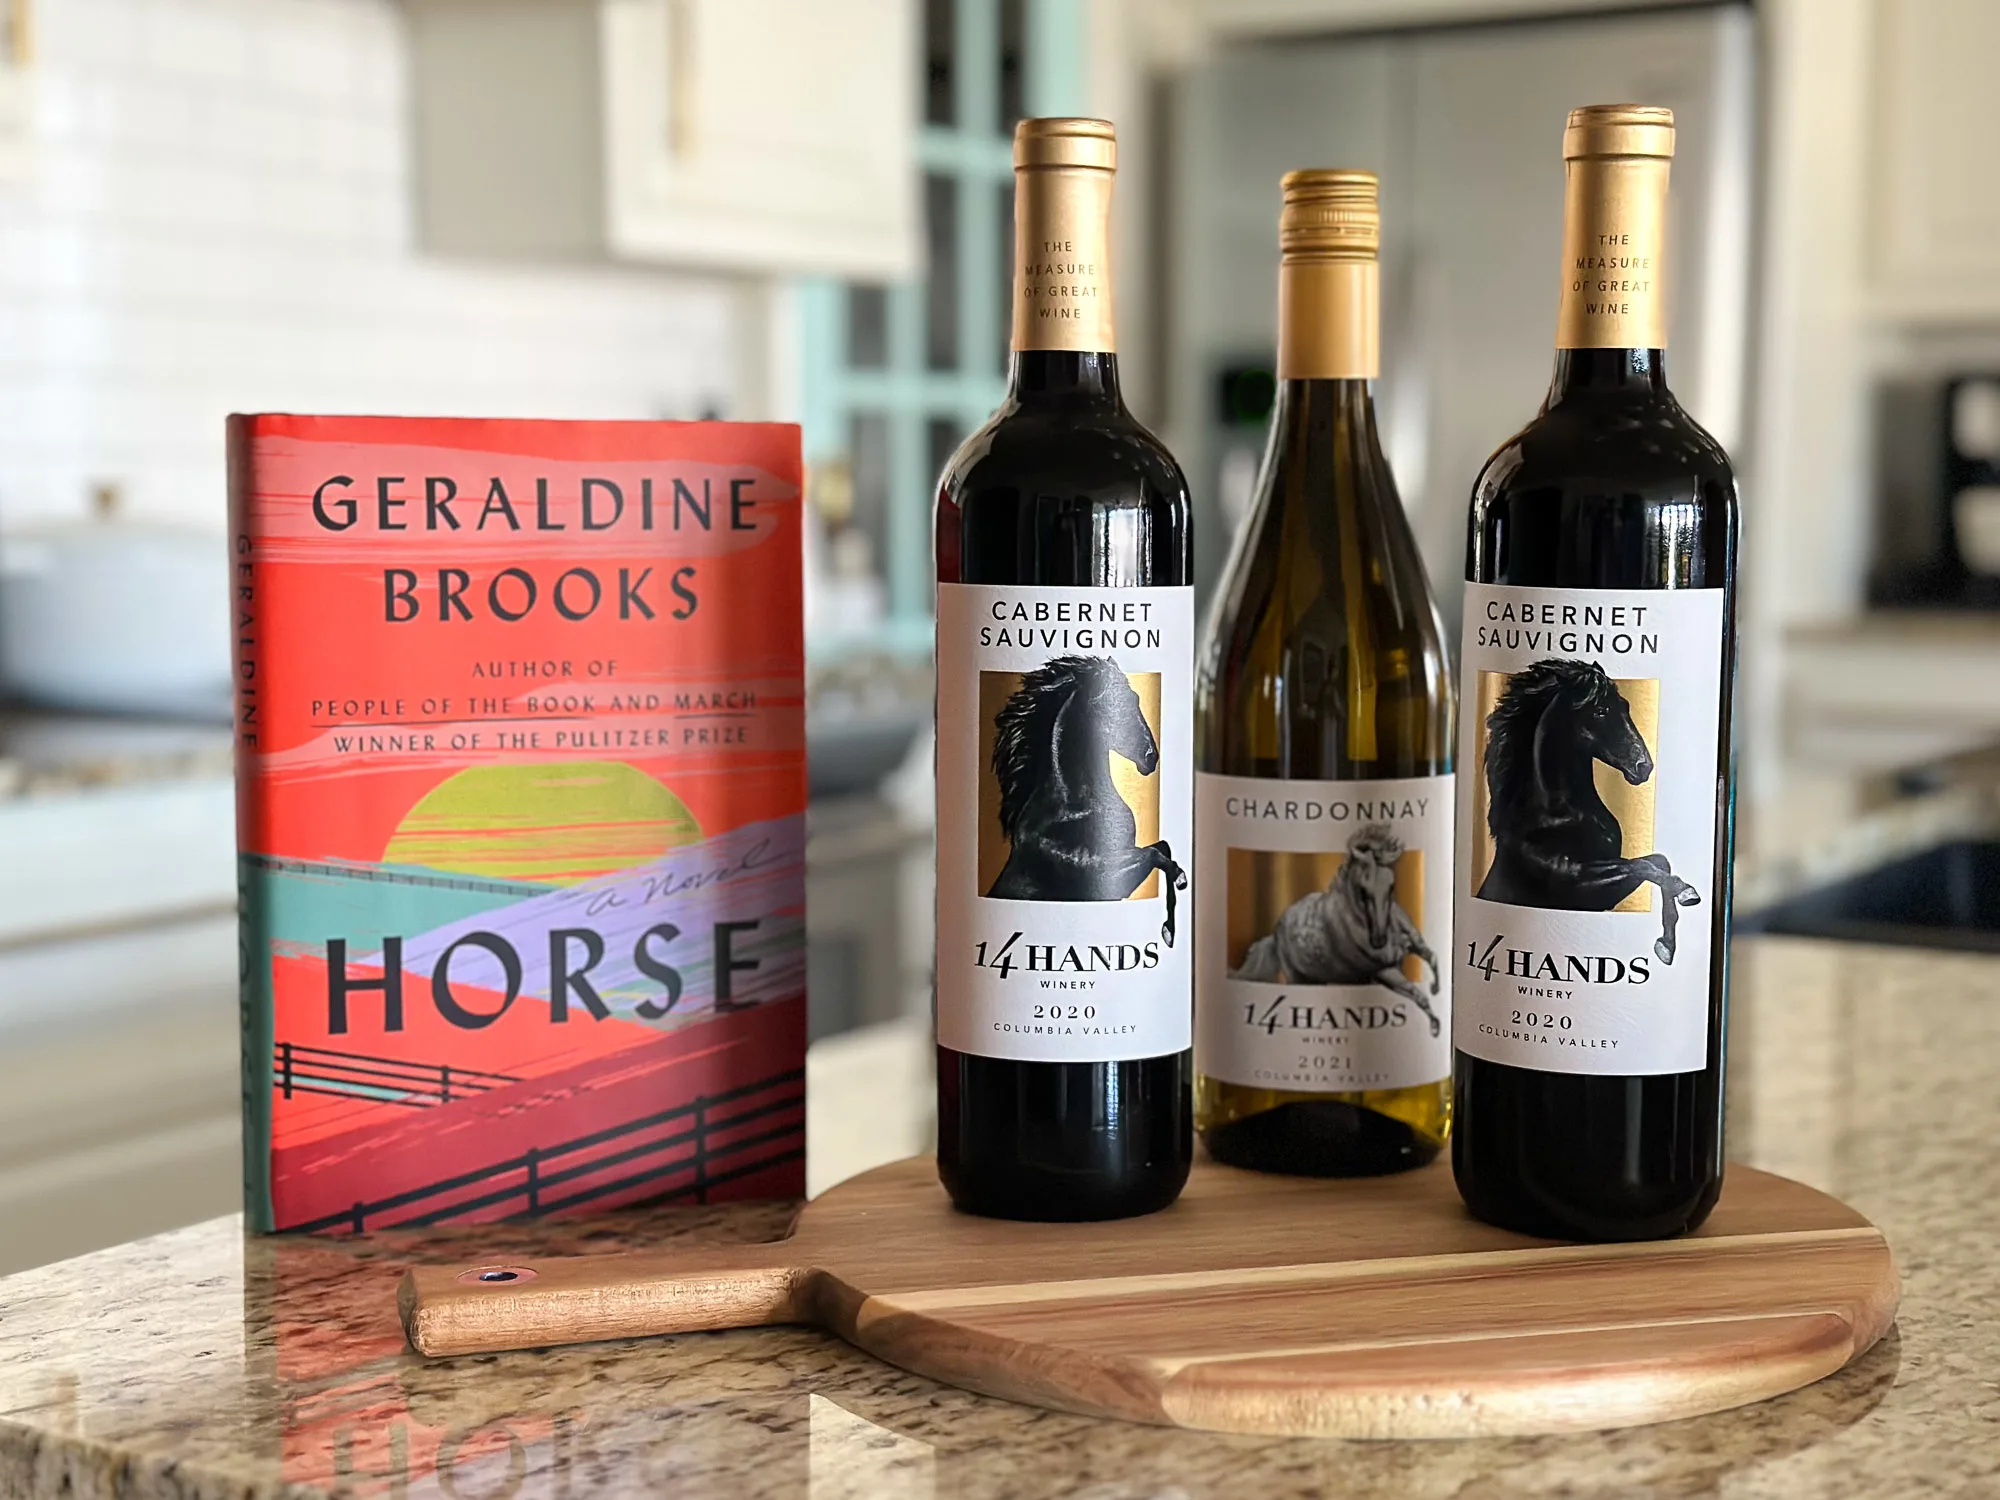 Horse book with three bottles of 14 hands wine